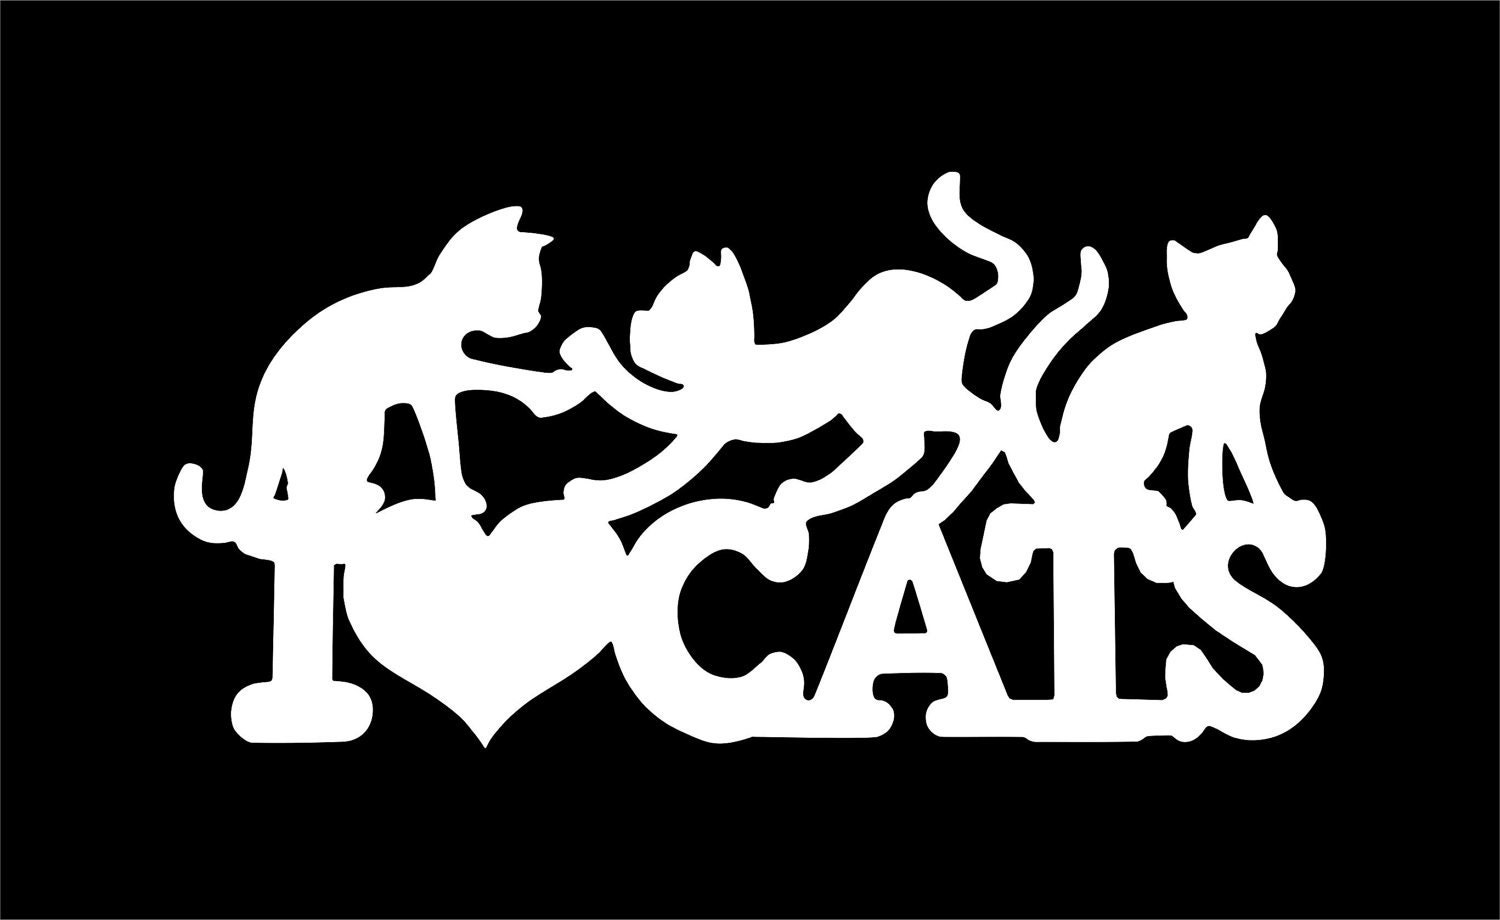 Download I love cats vinyl decal / sticker by ilikethatsticker on Etsy